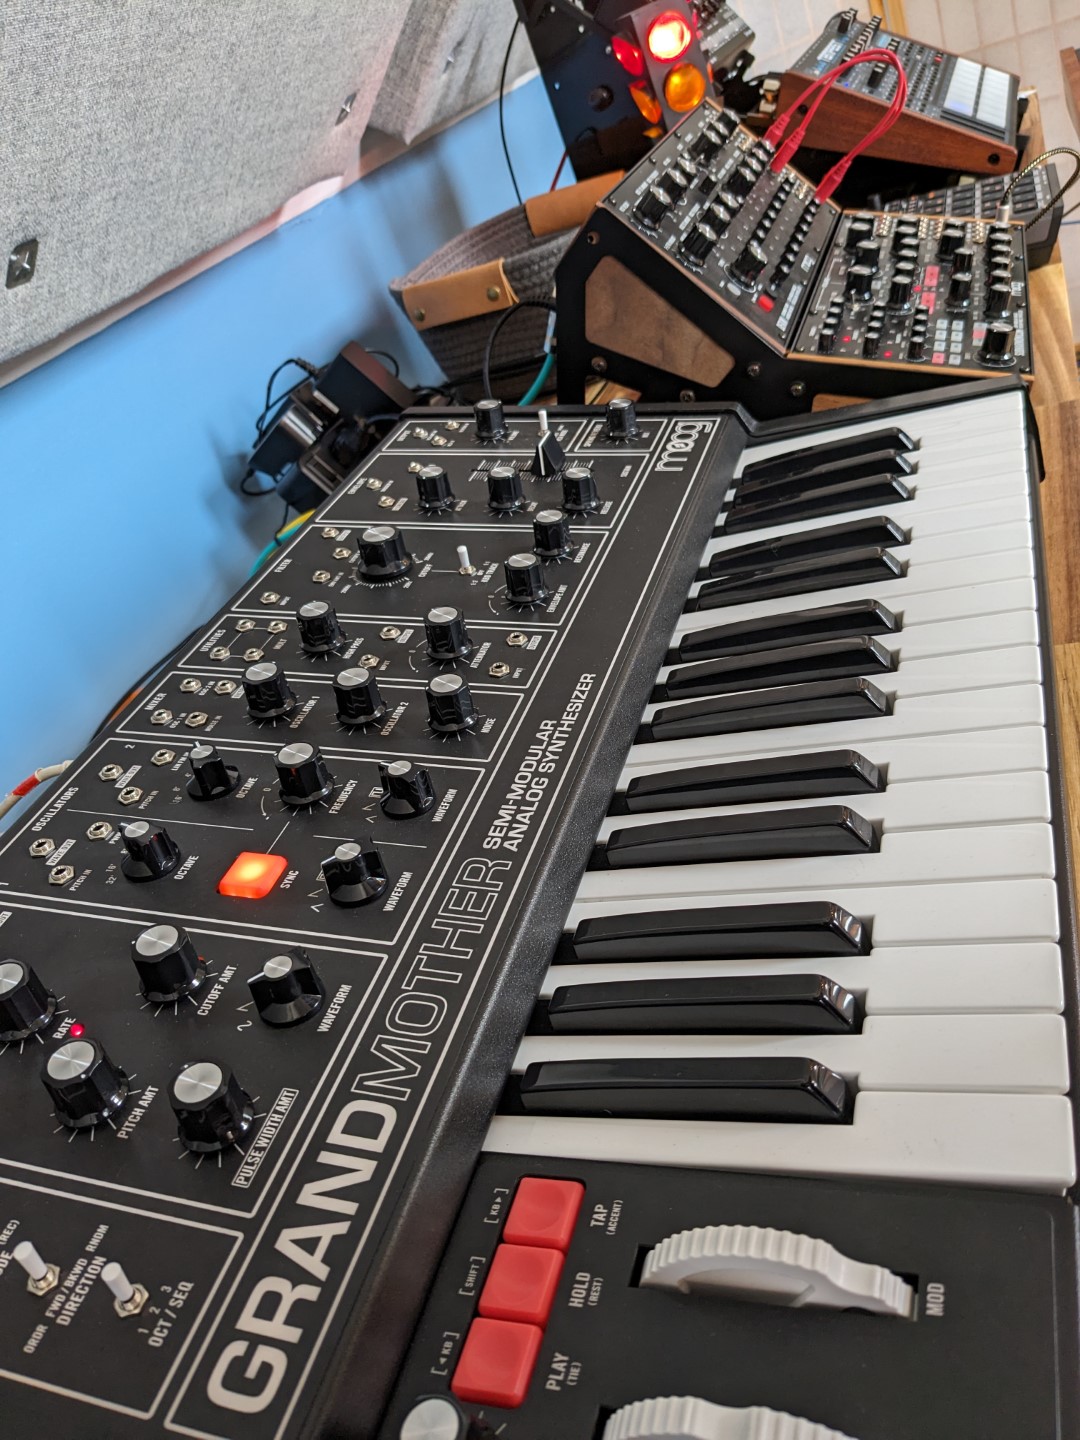 A side view of semi-modular synthesizers on a desk